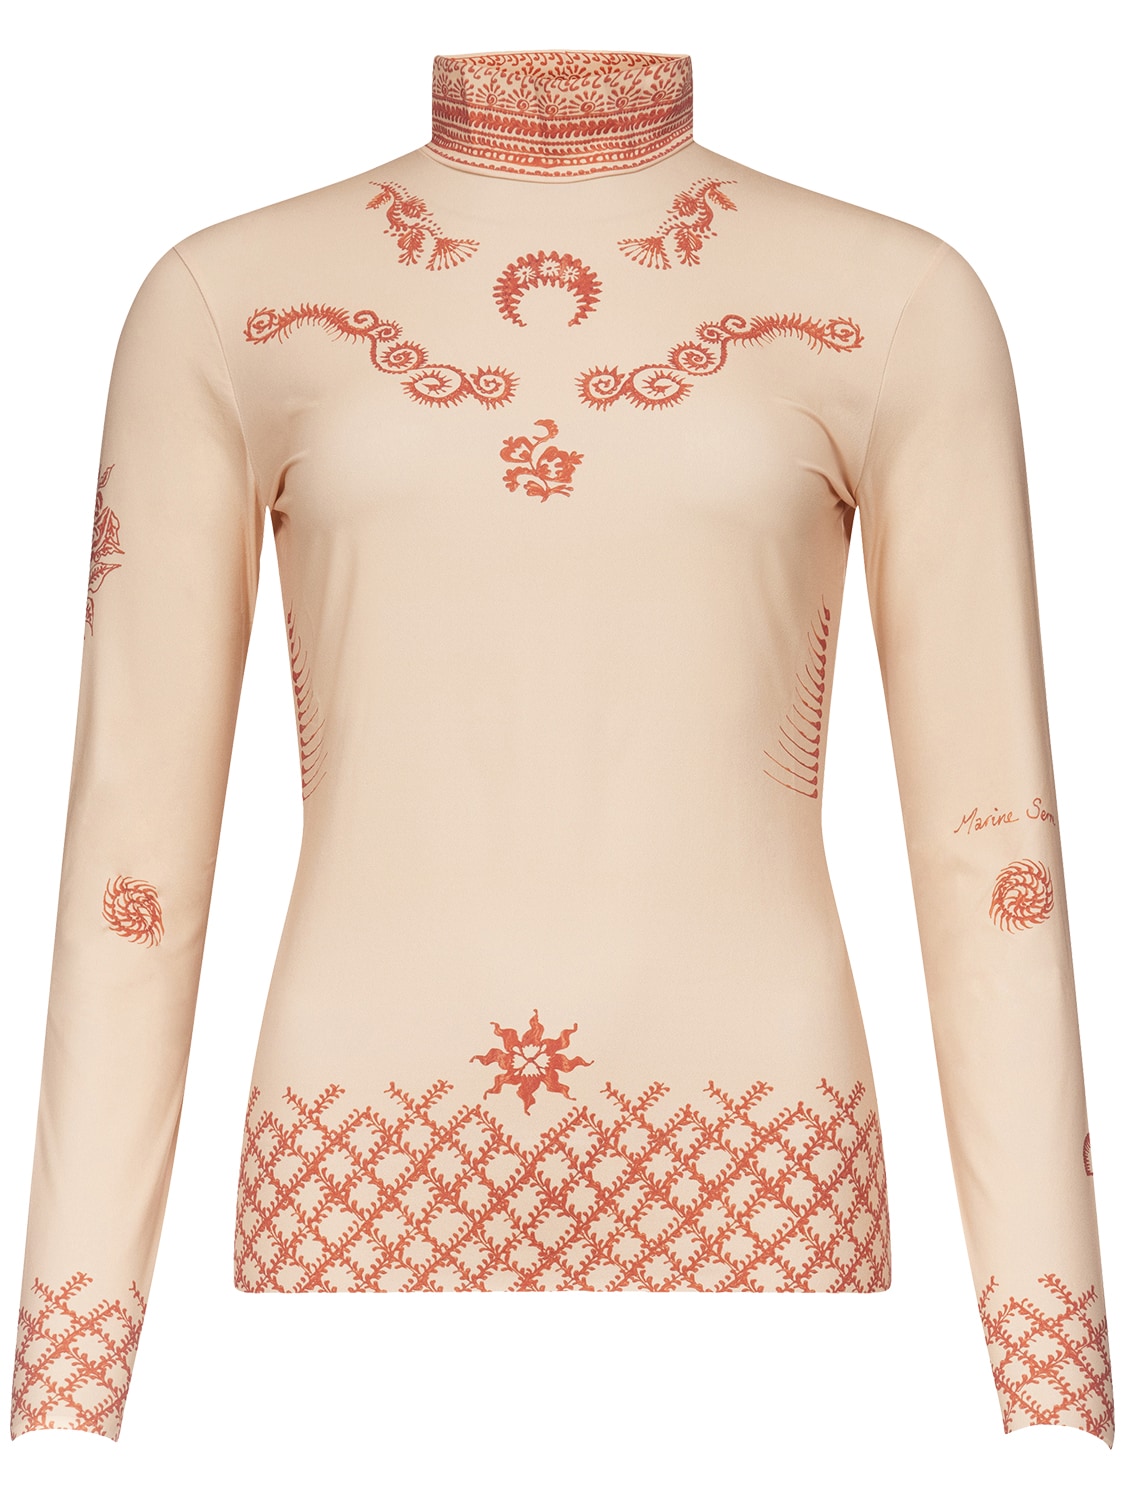 Image of Henna Print Long Sleeved Second Skin Top